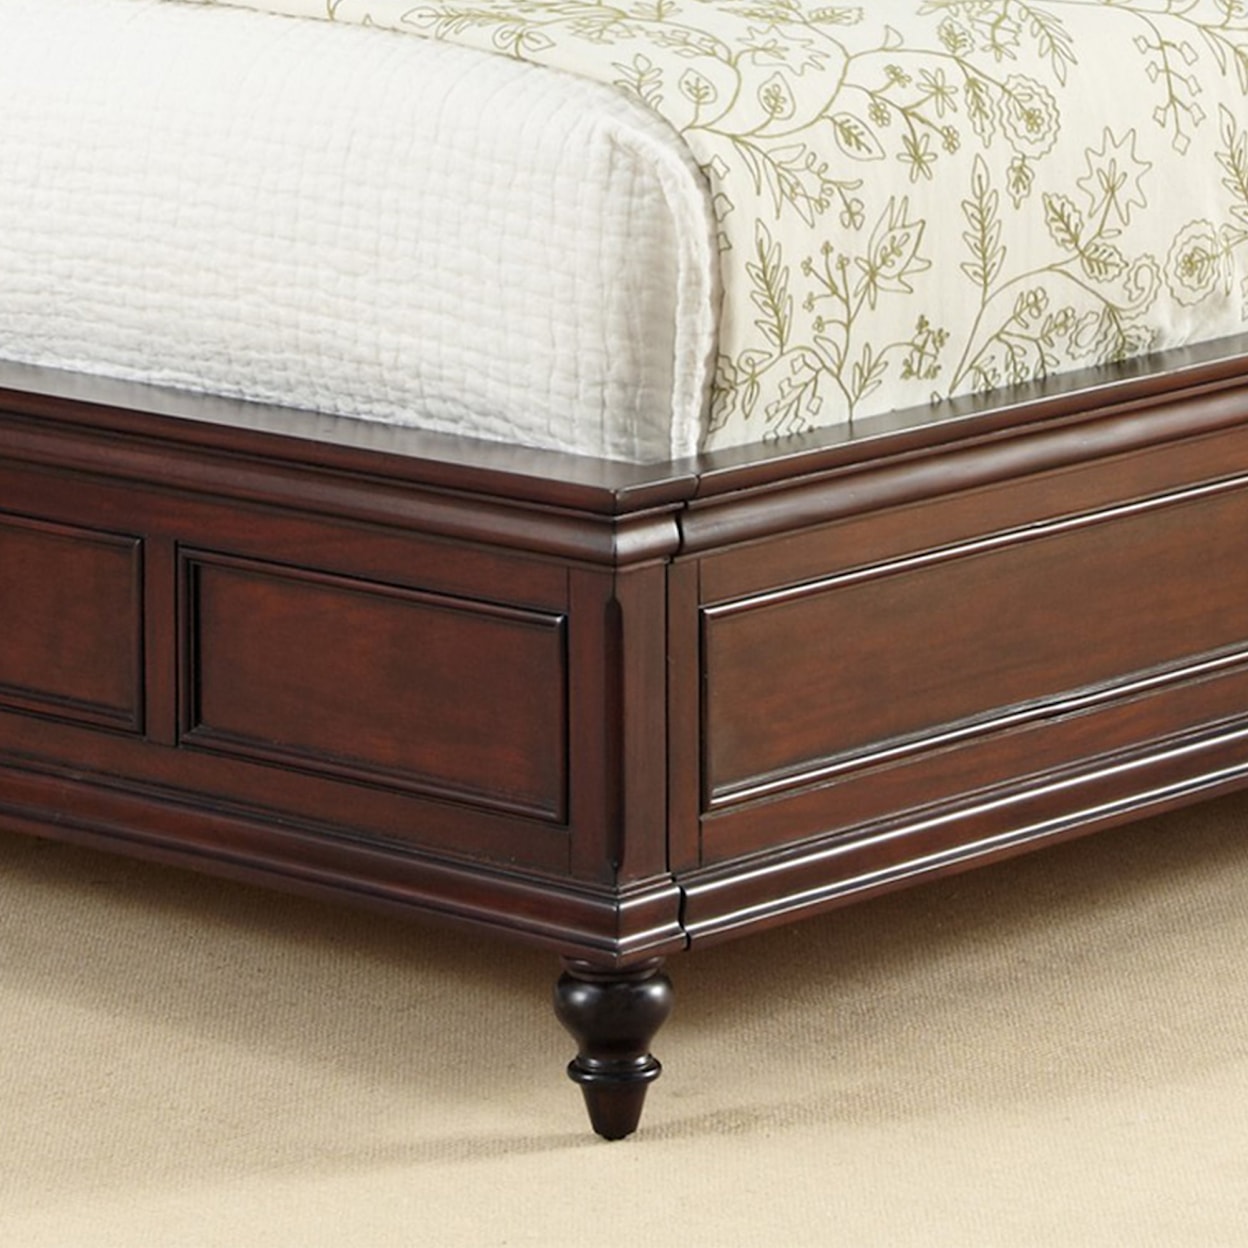 homestyles Lafayette King Bed